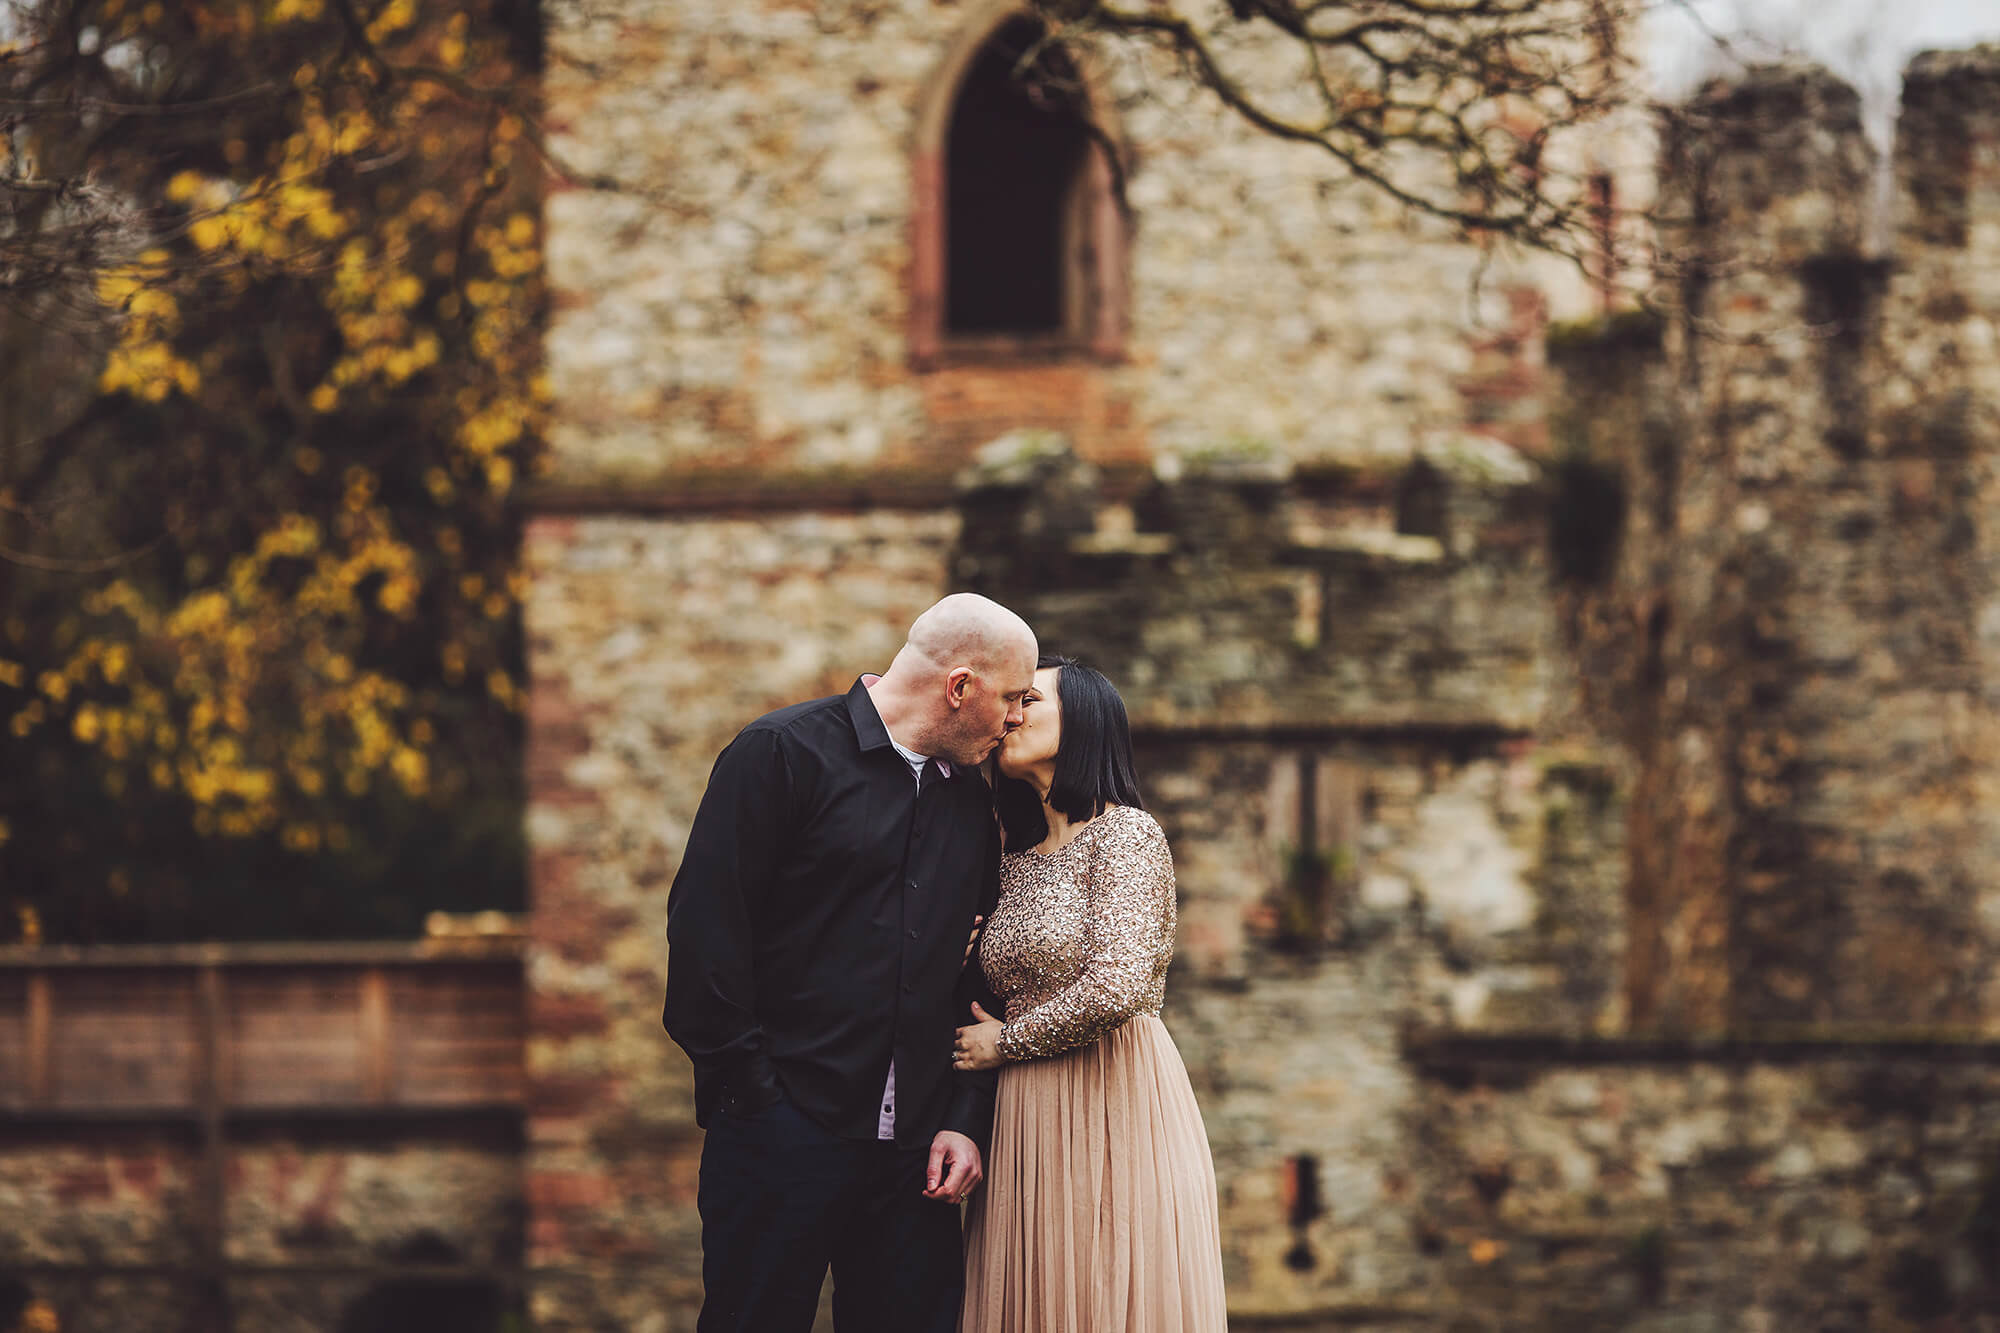 A romantic kiss in front of a German castle